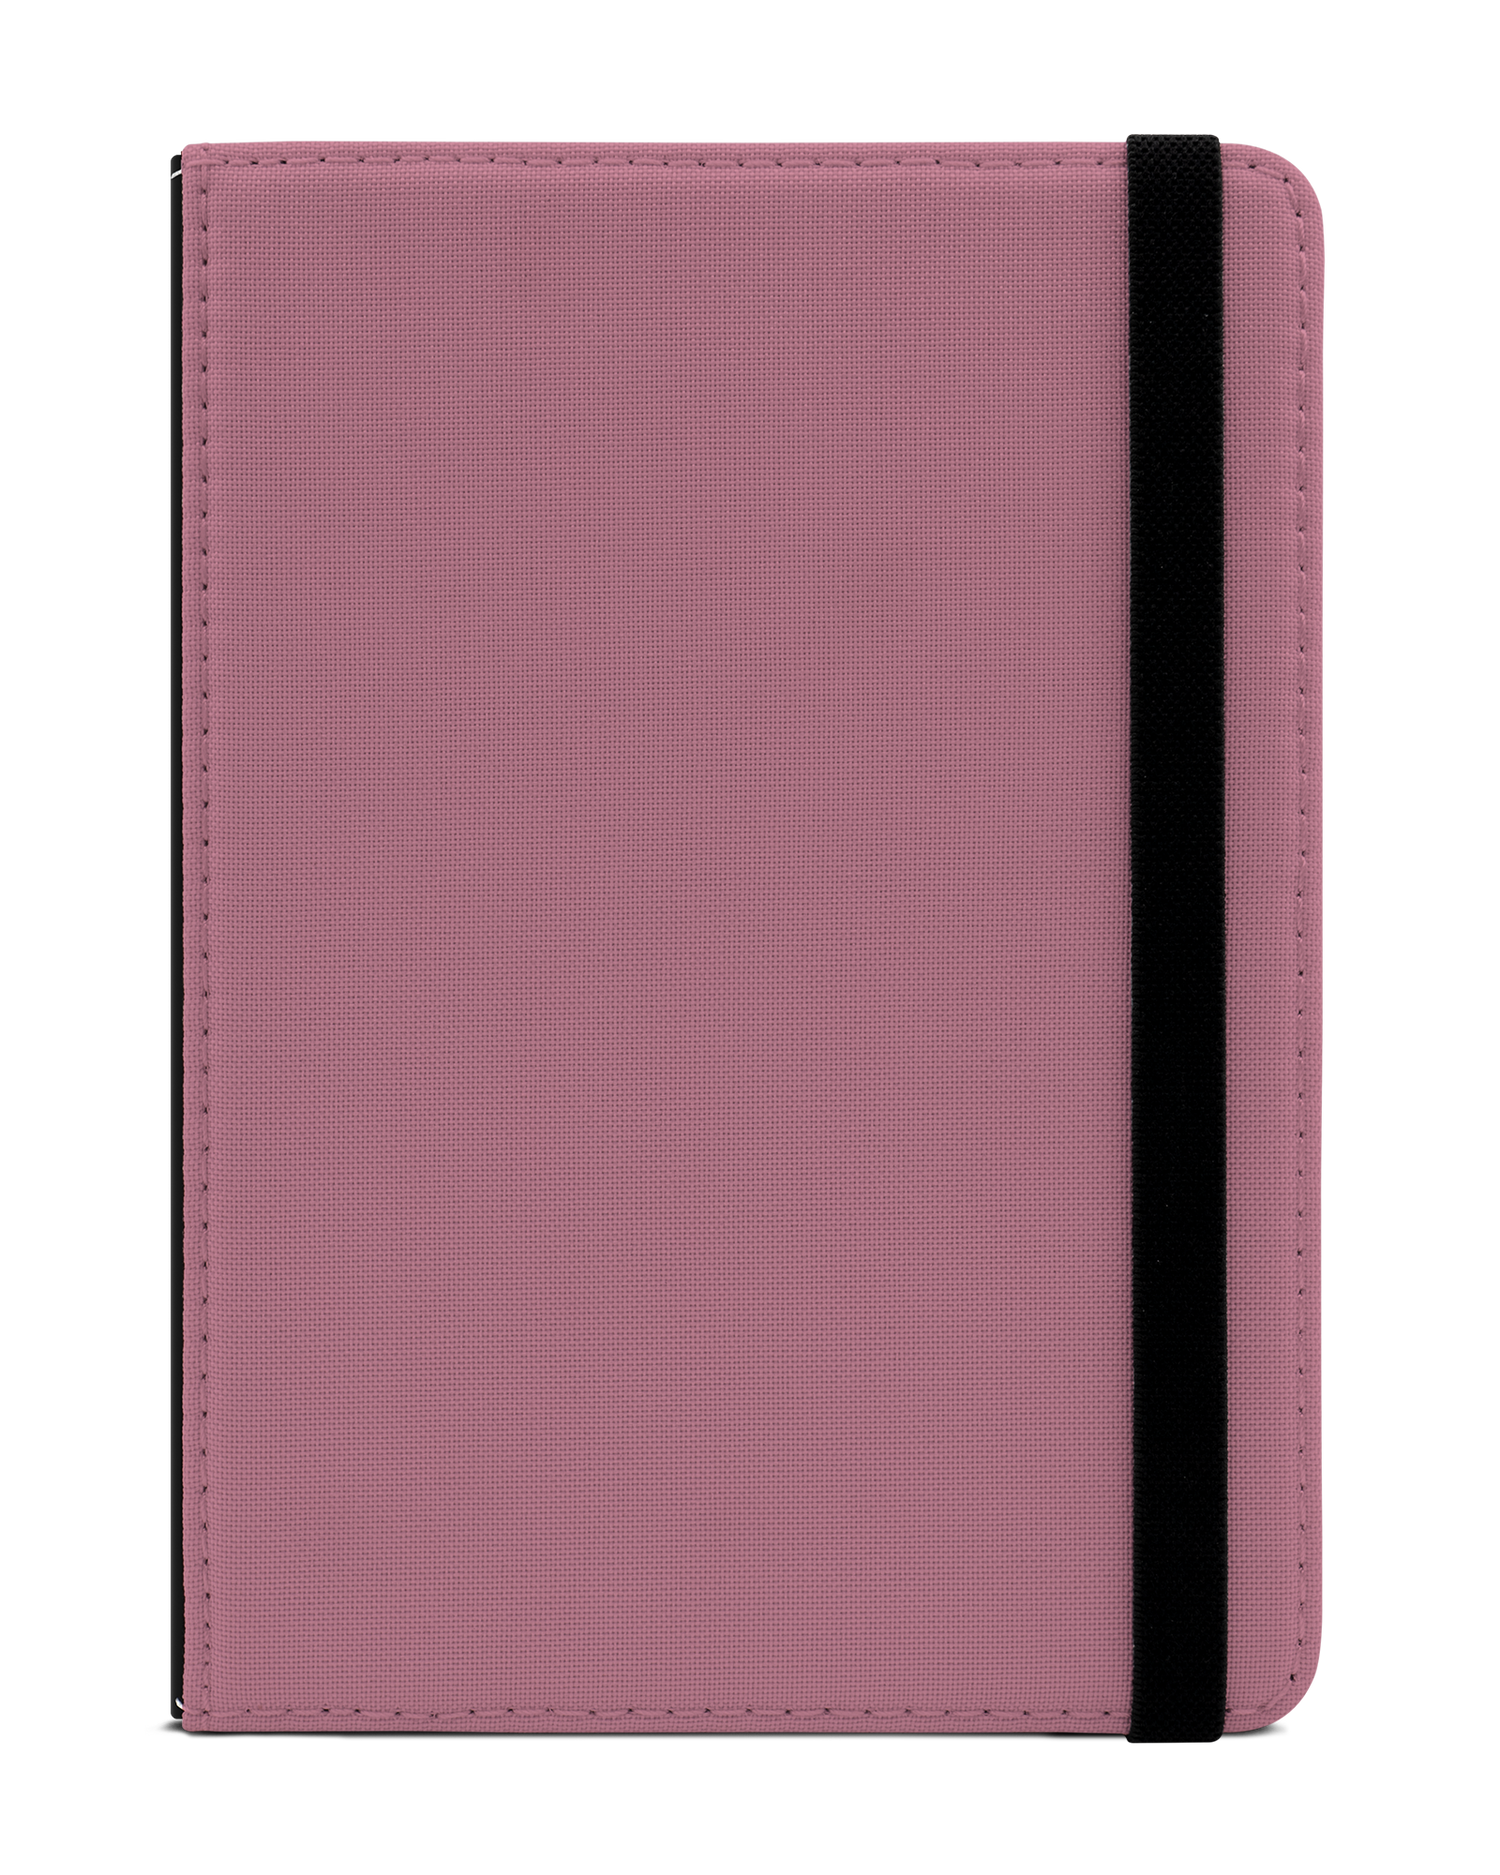 WILD ROSE eReader Case for tolino vision 1 to 4 HD: Front View